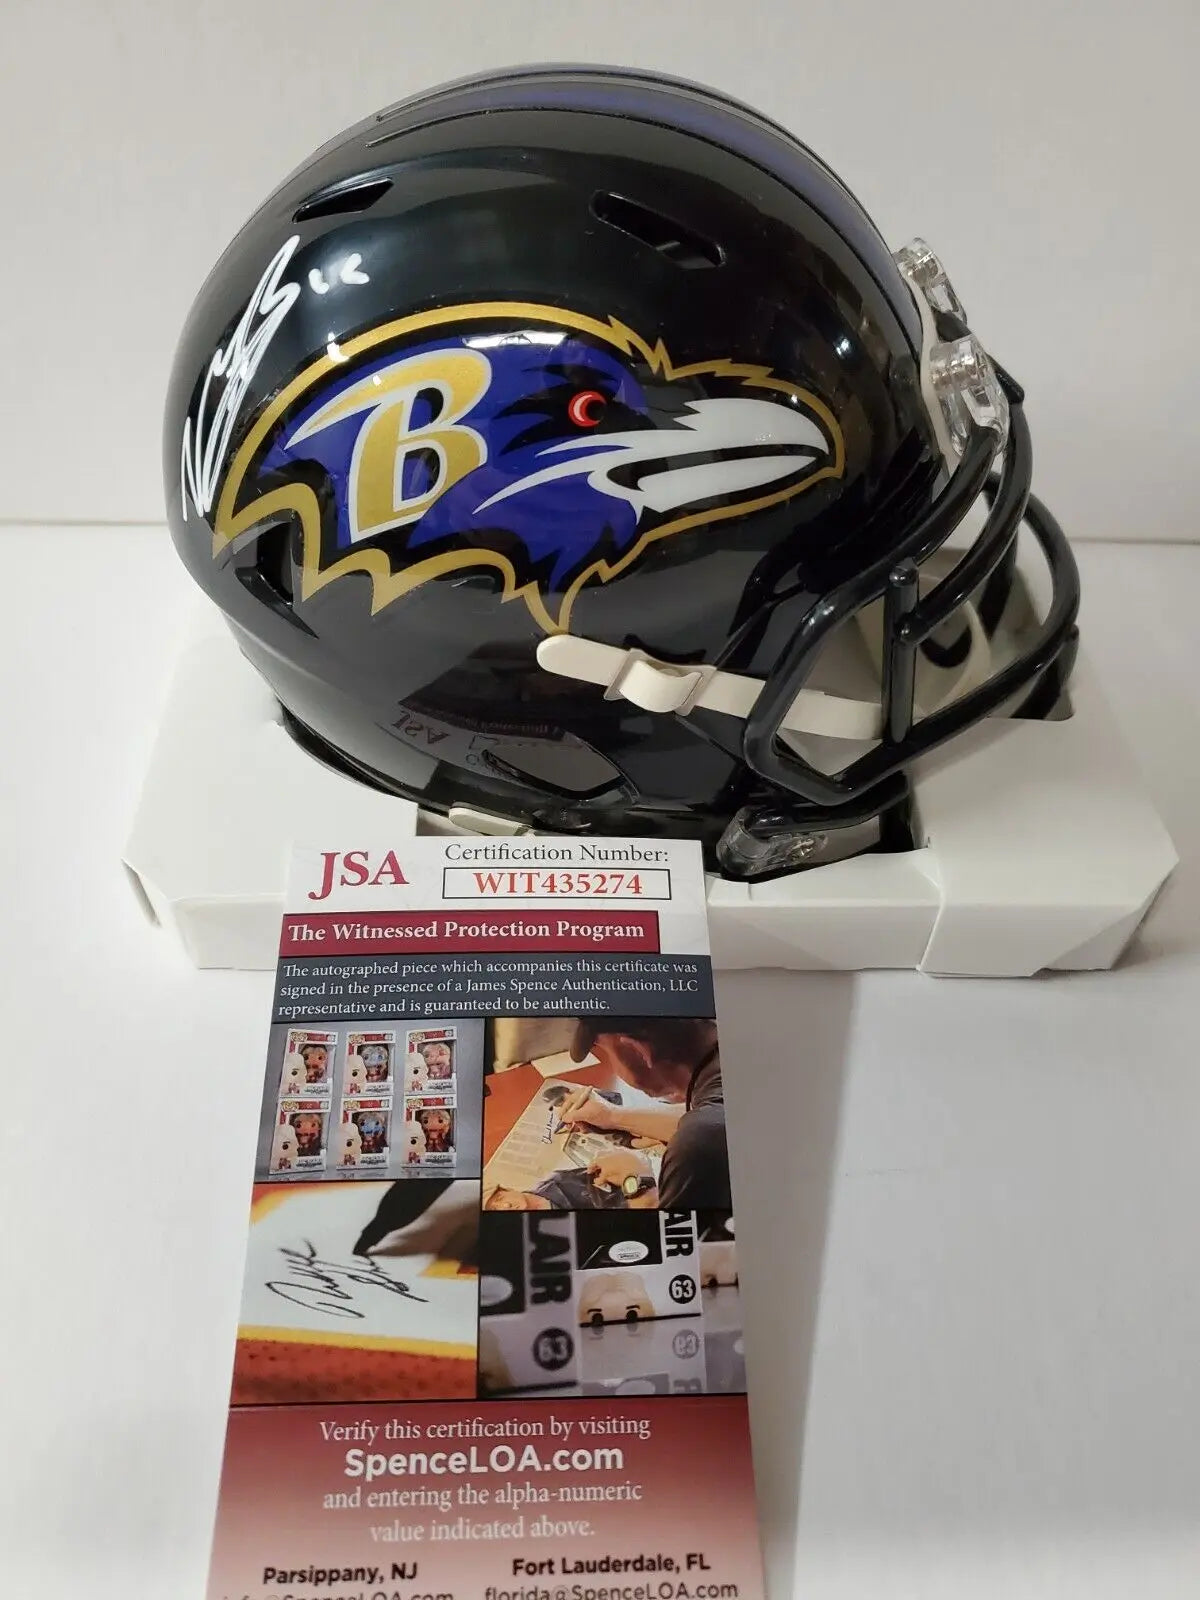 MVP Authentics Marquise Brown Autographed Signed Baltimore Ravens Mini Helmet Jsa Coa 116.10 sports jersey framing , jersey framing